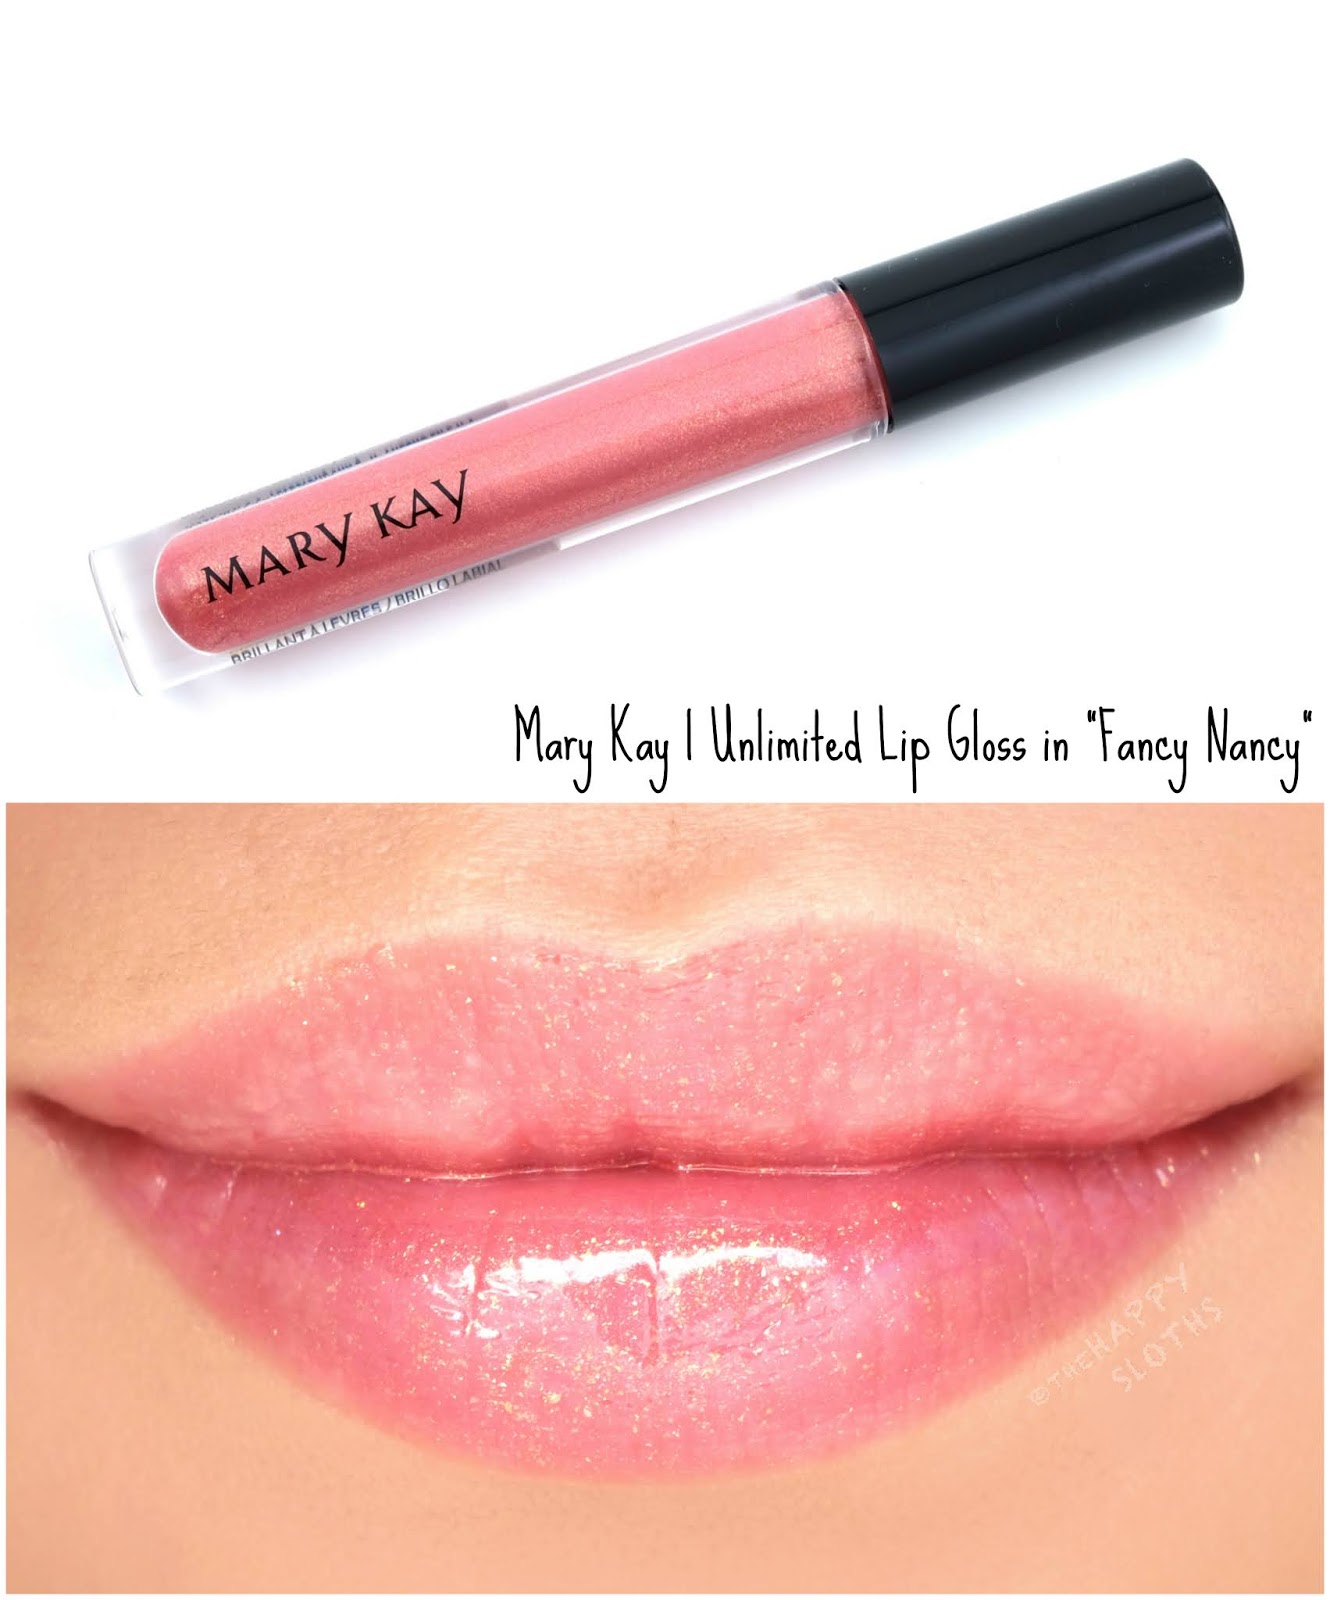 Mary Kay | Unlimited Lip Gloss in "Fancy Nancy": Review and Swatches